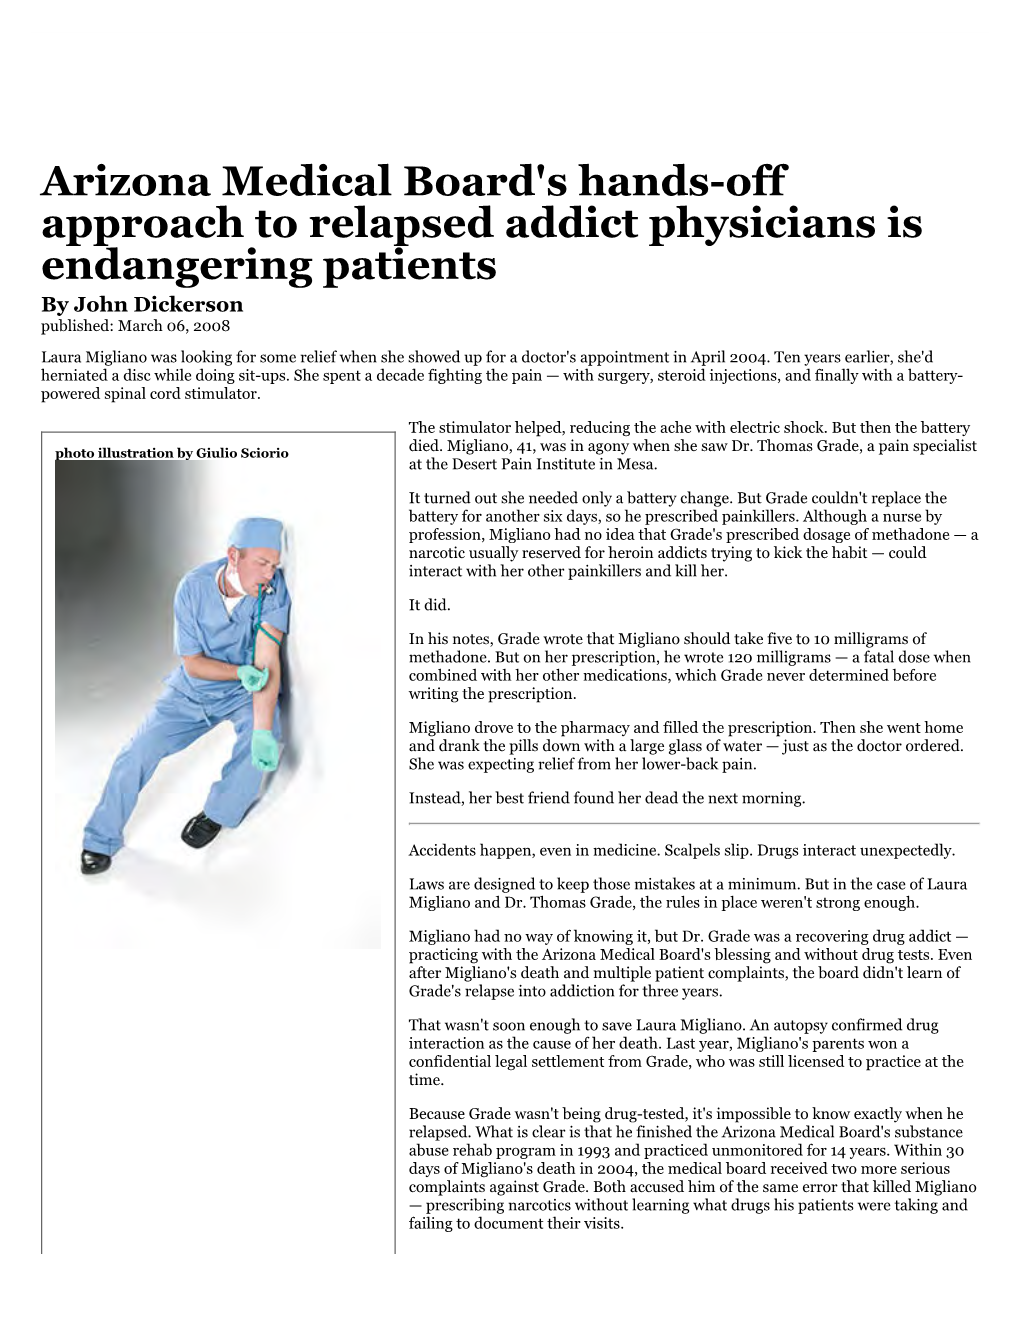 Arizona Medical Board's Hands-Off Approach to Relapsed Addict